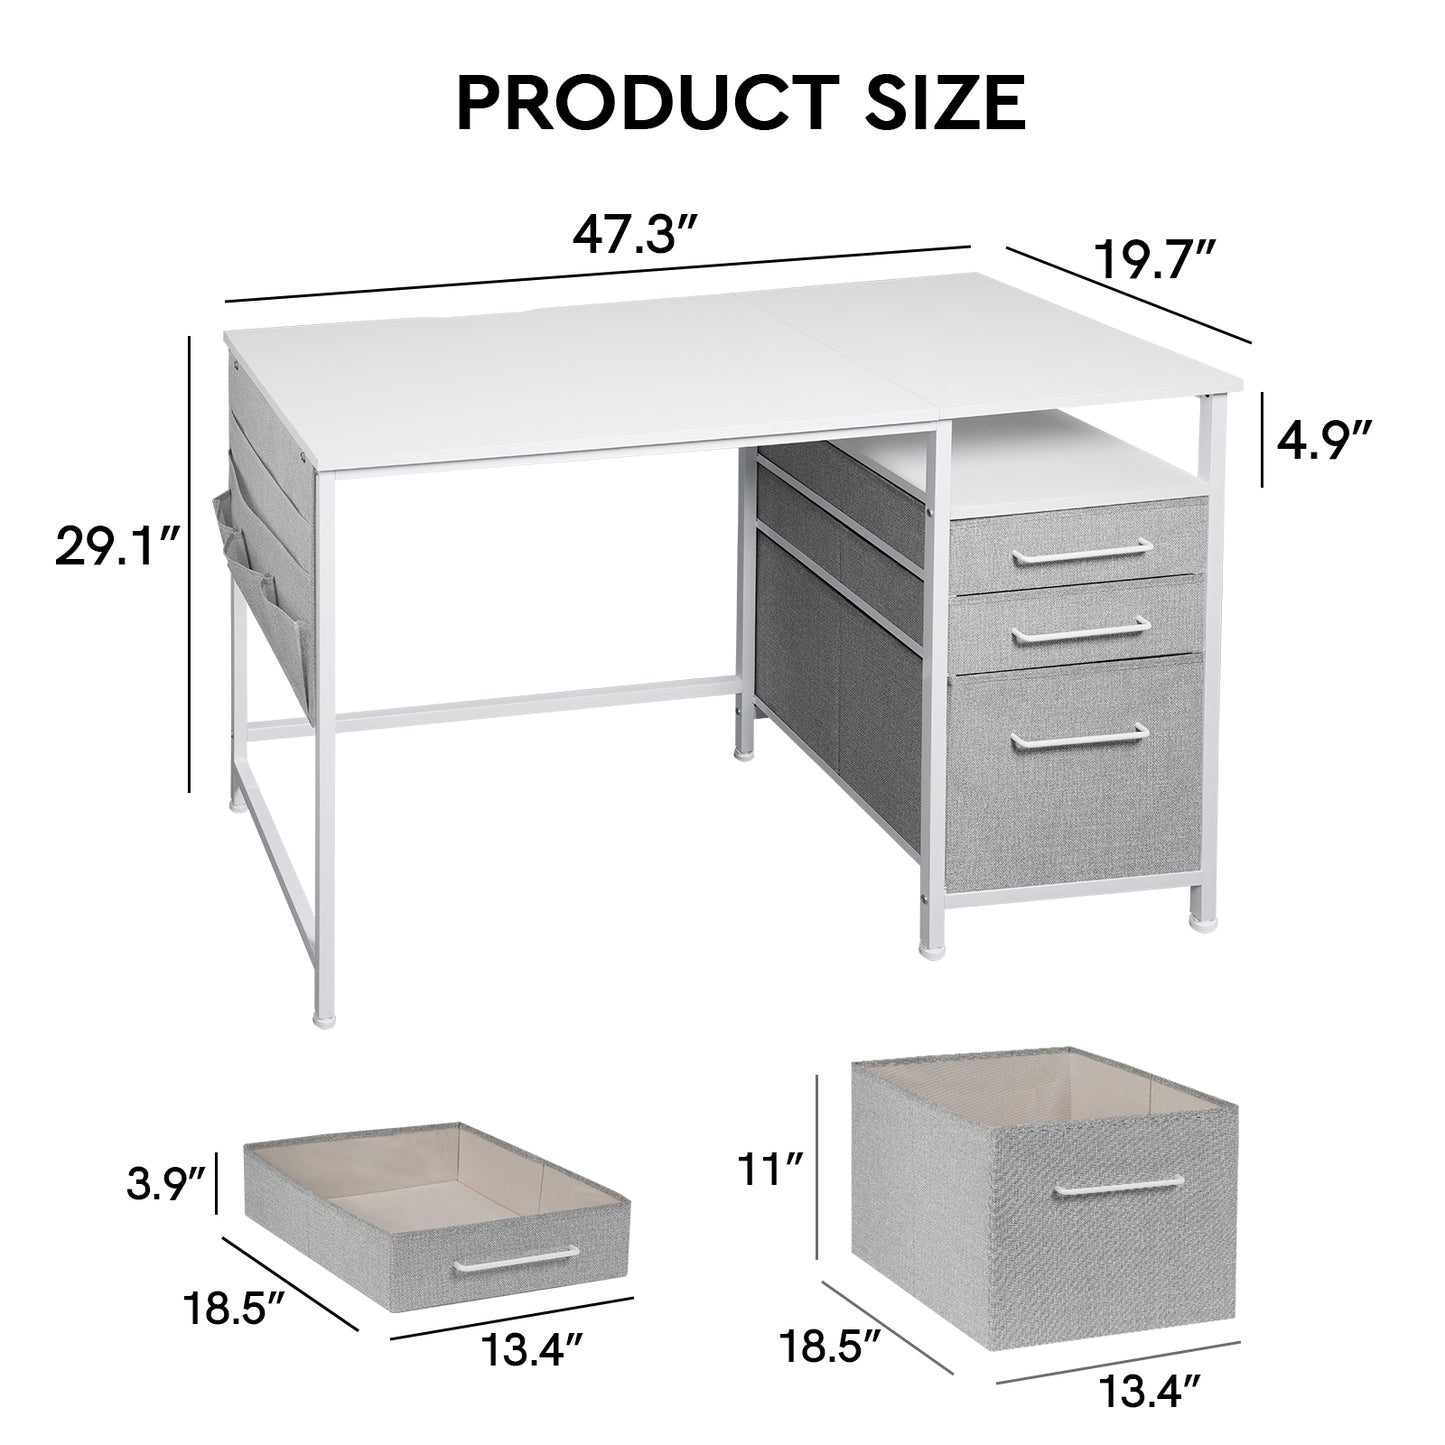 MAIHAIL 47 inch Desk with Drawers, White